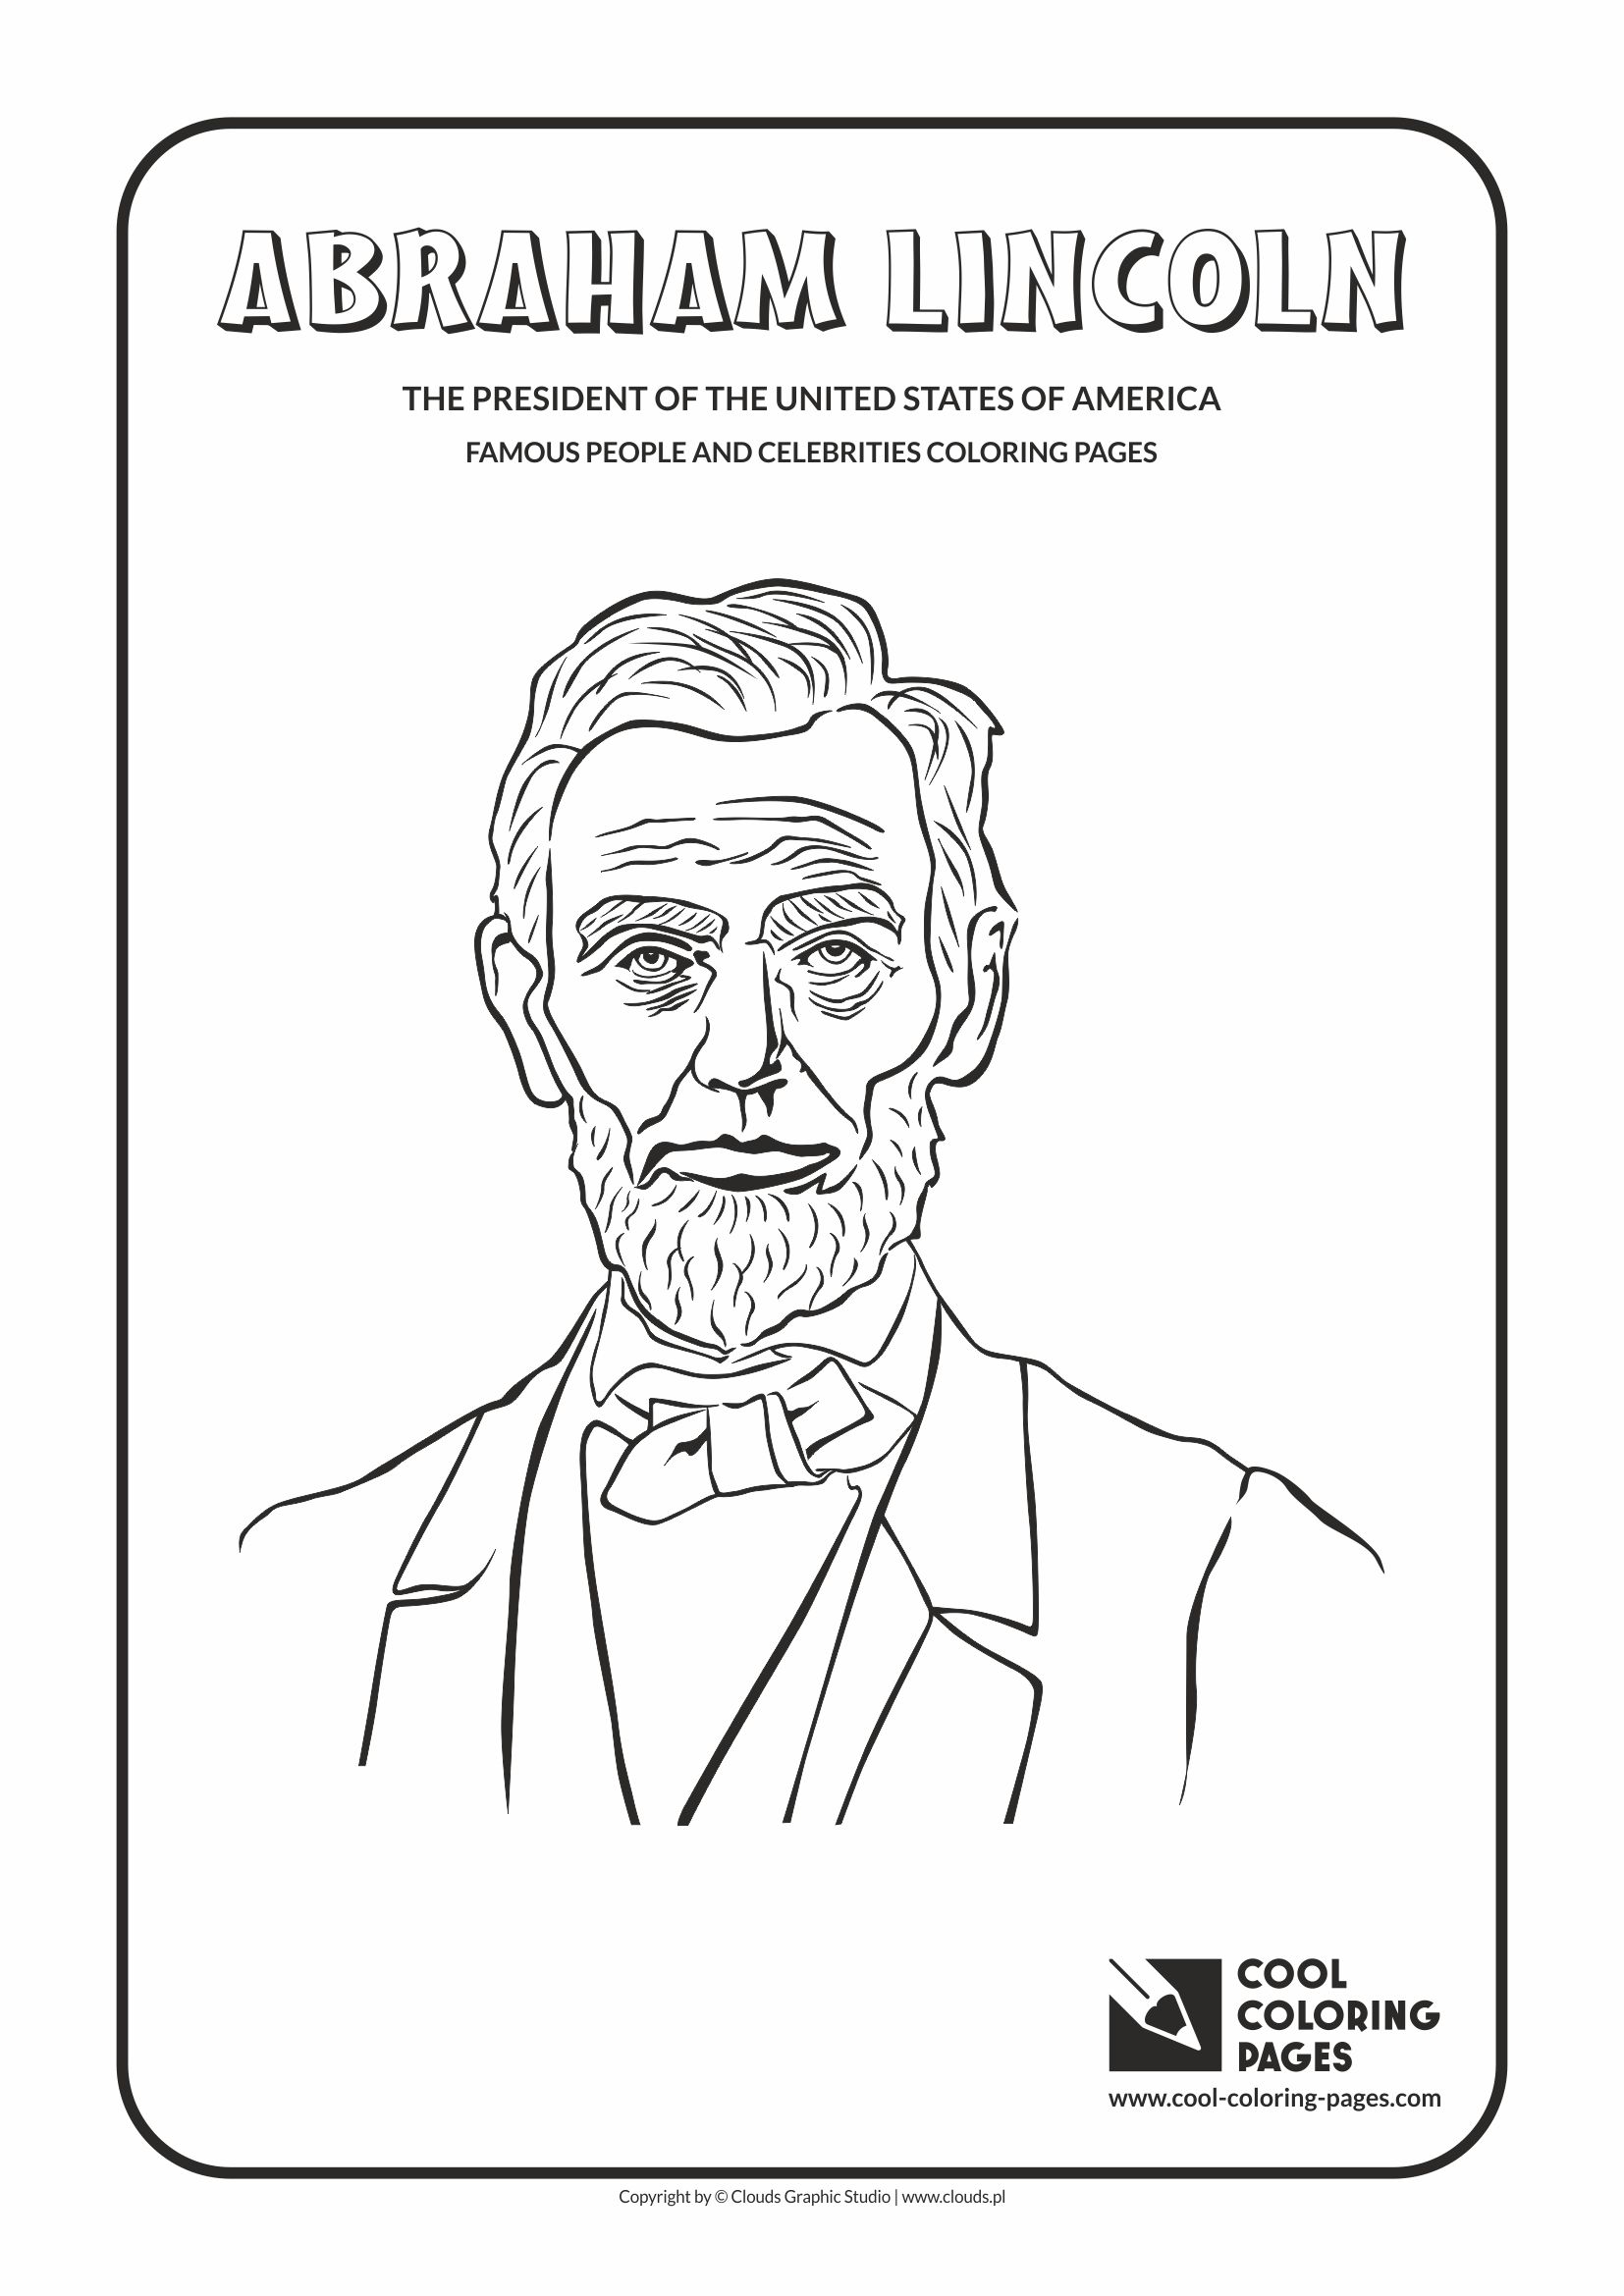 Cool Coloring Pages - Others / Abraham Lincoln / Coloring page with Abraham Lincoln